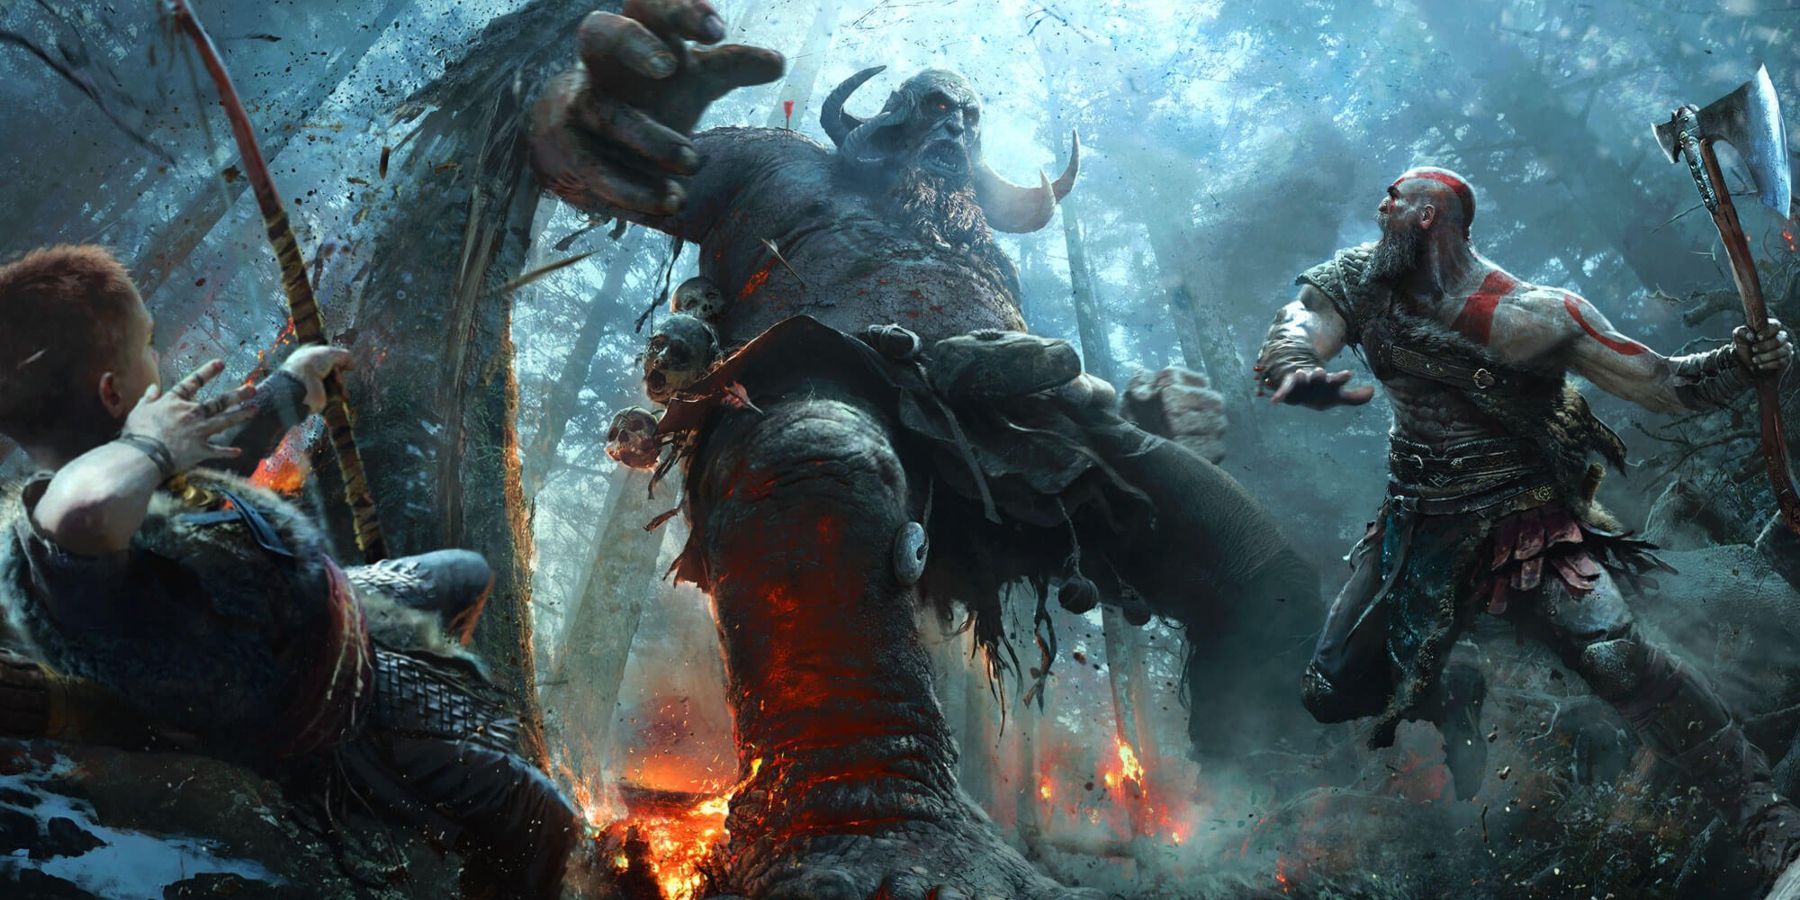 Kratos and atreus fighting a troll